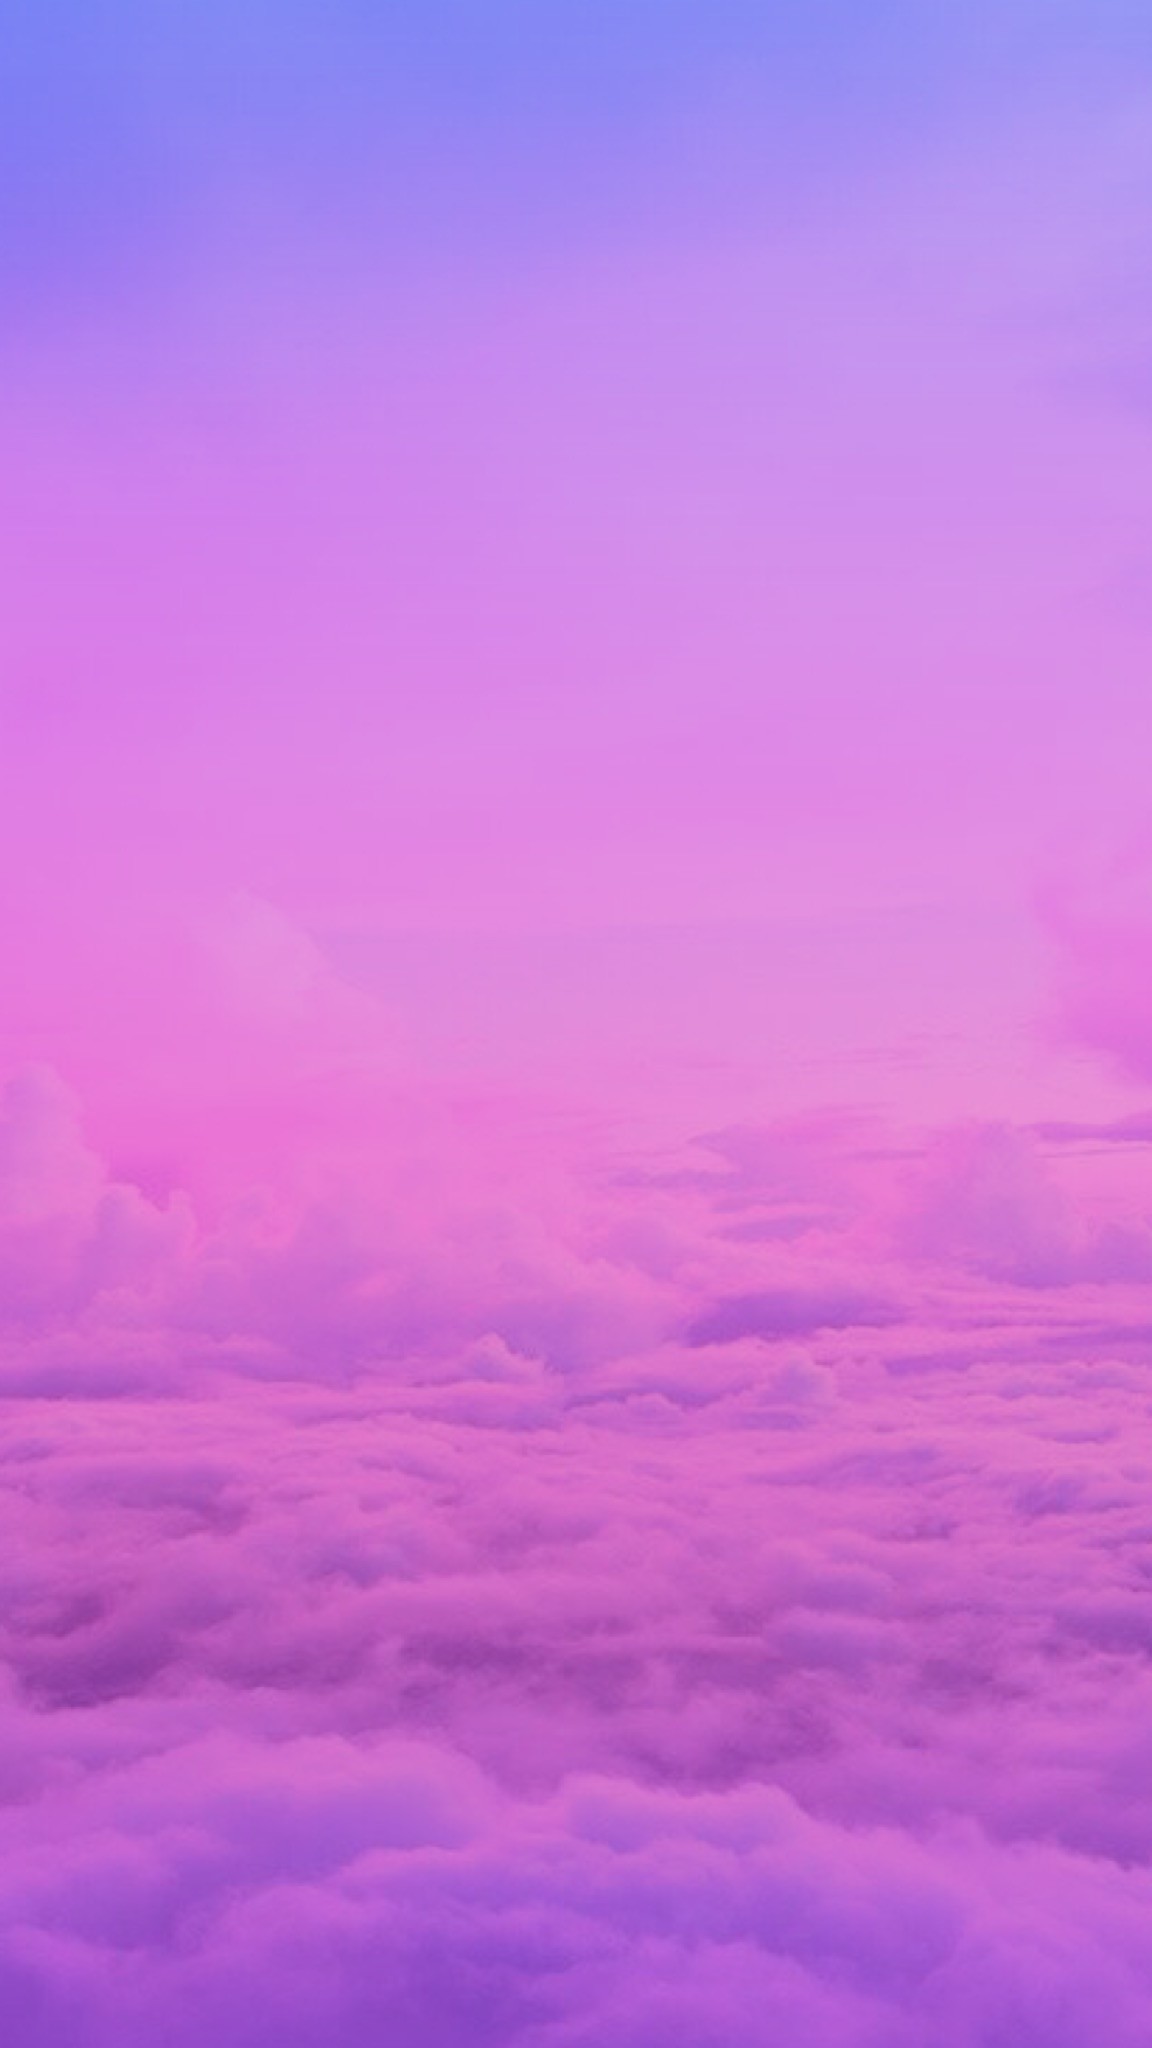 Original image not by me! I just made the ombrÃ©/gradient. Wallpaper,